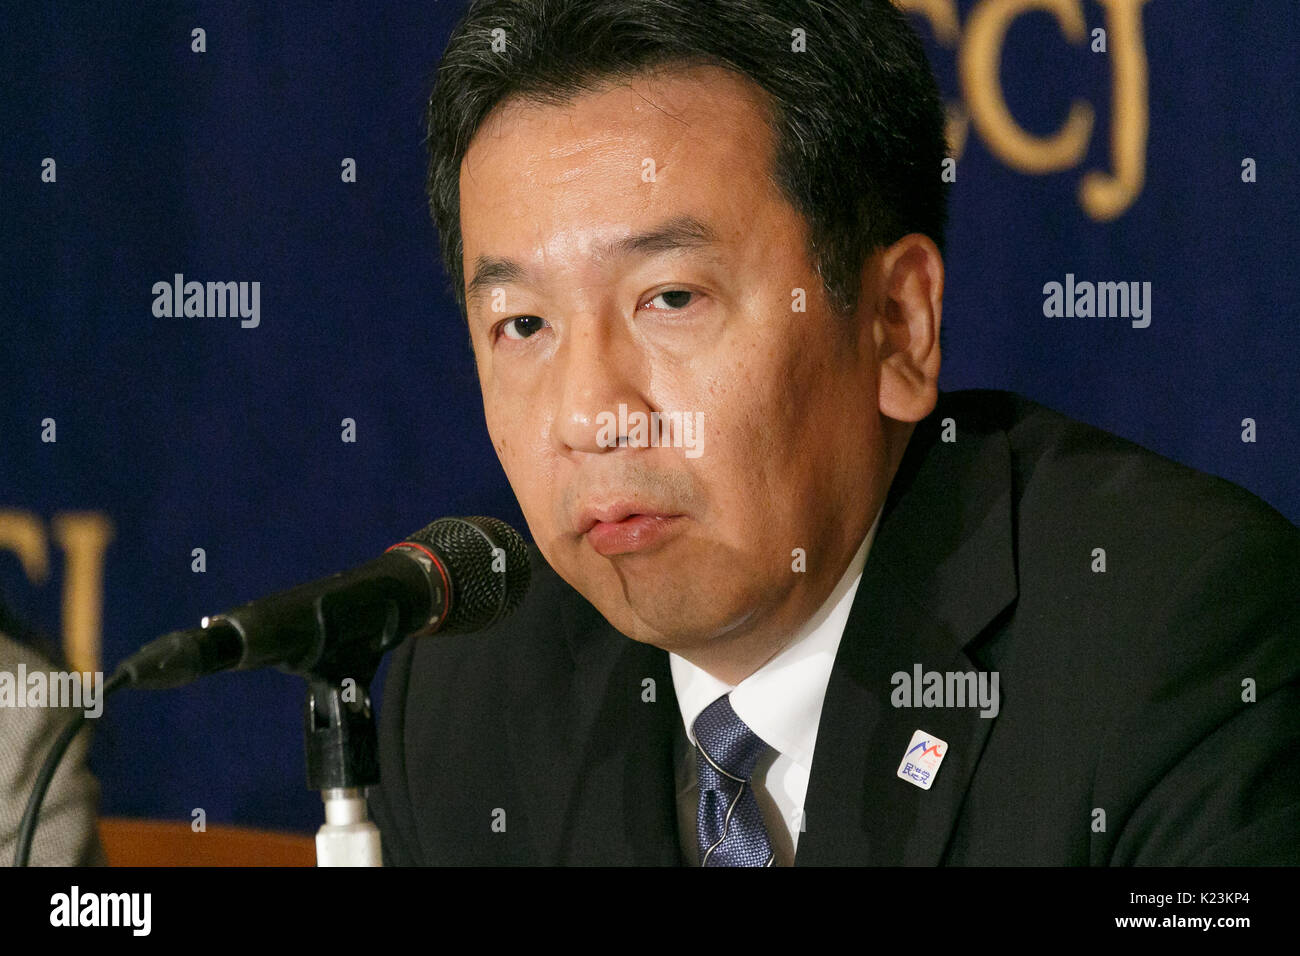 Former Democratic Party (DP) Secretary General Yukio Edano attends a news conference at the Foreign Correspondents' Club of Japan on August 29, 2017, Tokyo, Japan. Edano and former DP Foreign Minister, Maehara, visited the Club to speak about the opposition party's leadership election which will be held on September 1st. They also commented North Korea's missile launch that flew over Japan this morning. Credit: Rodrigo Reyes Marin/AFLO/Alamy Live News Stock Photo